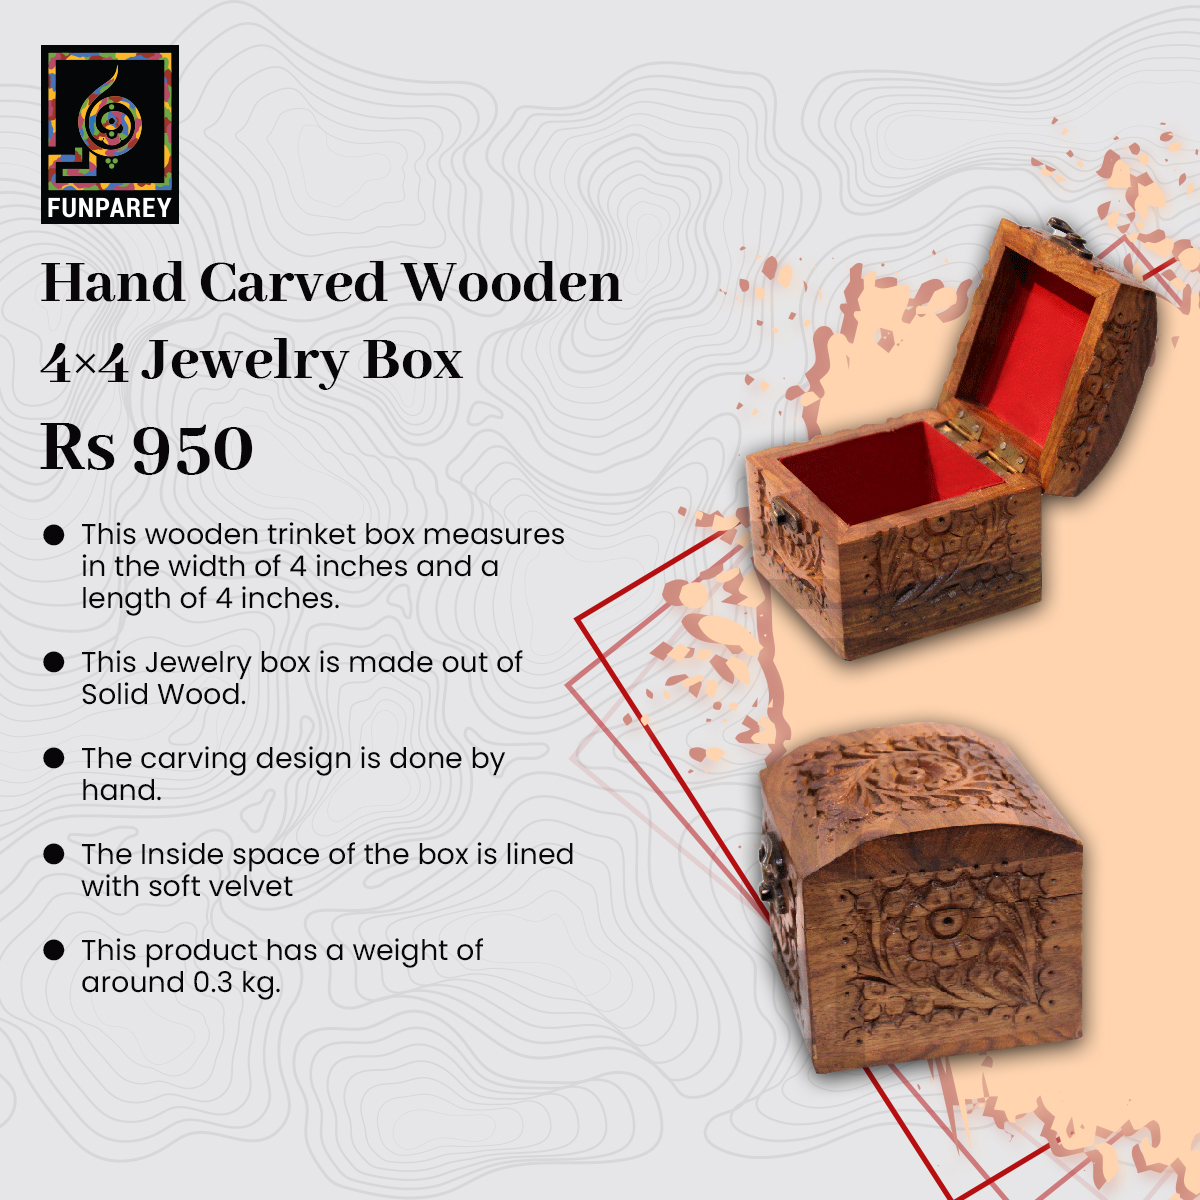 Discover Elegance: Hand Carved Wooden 4×4 Jewelry Box 
- Dimensions: Width - 4 inches, Length - 4 inches
- Material: Solid Wood
- Handcrafted: Intricately carved design

Visit funparey.com/.../hand-carve… to order
#HandCarved #WoodenJewelryBox #HomeDecor #ArtisanCrafts #LuxuryLiving